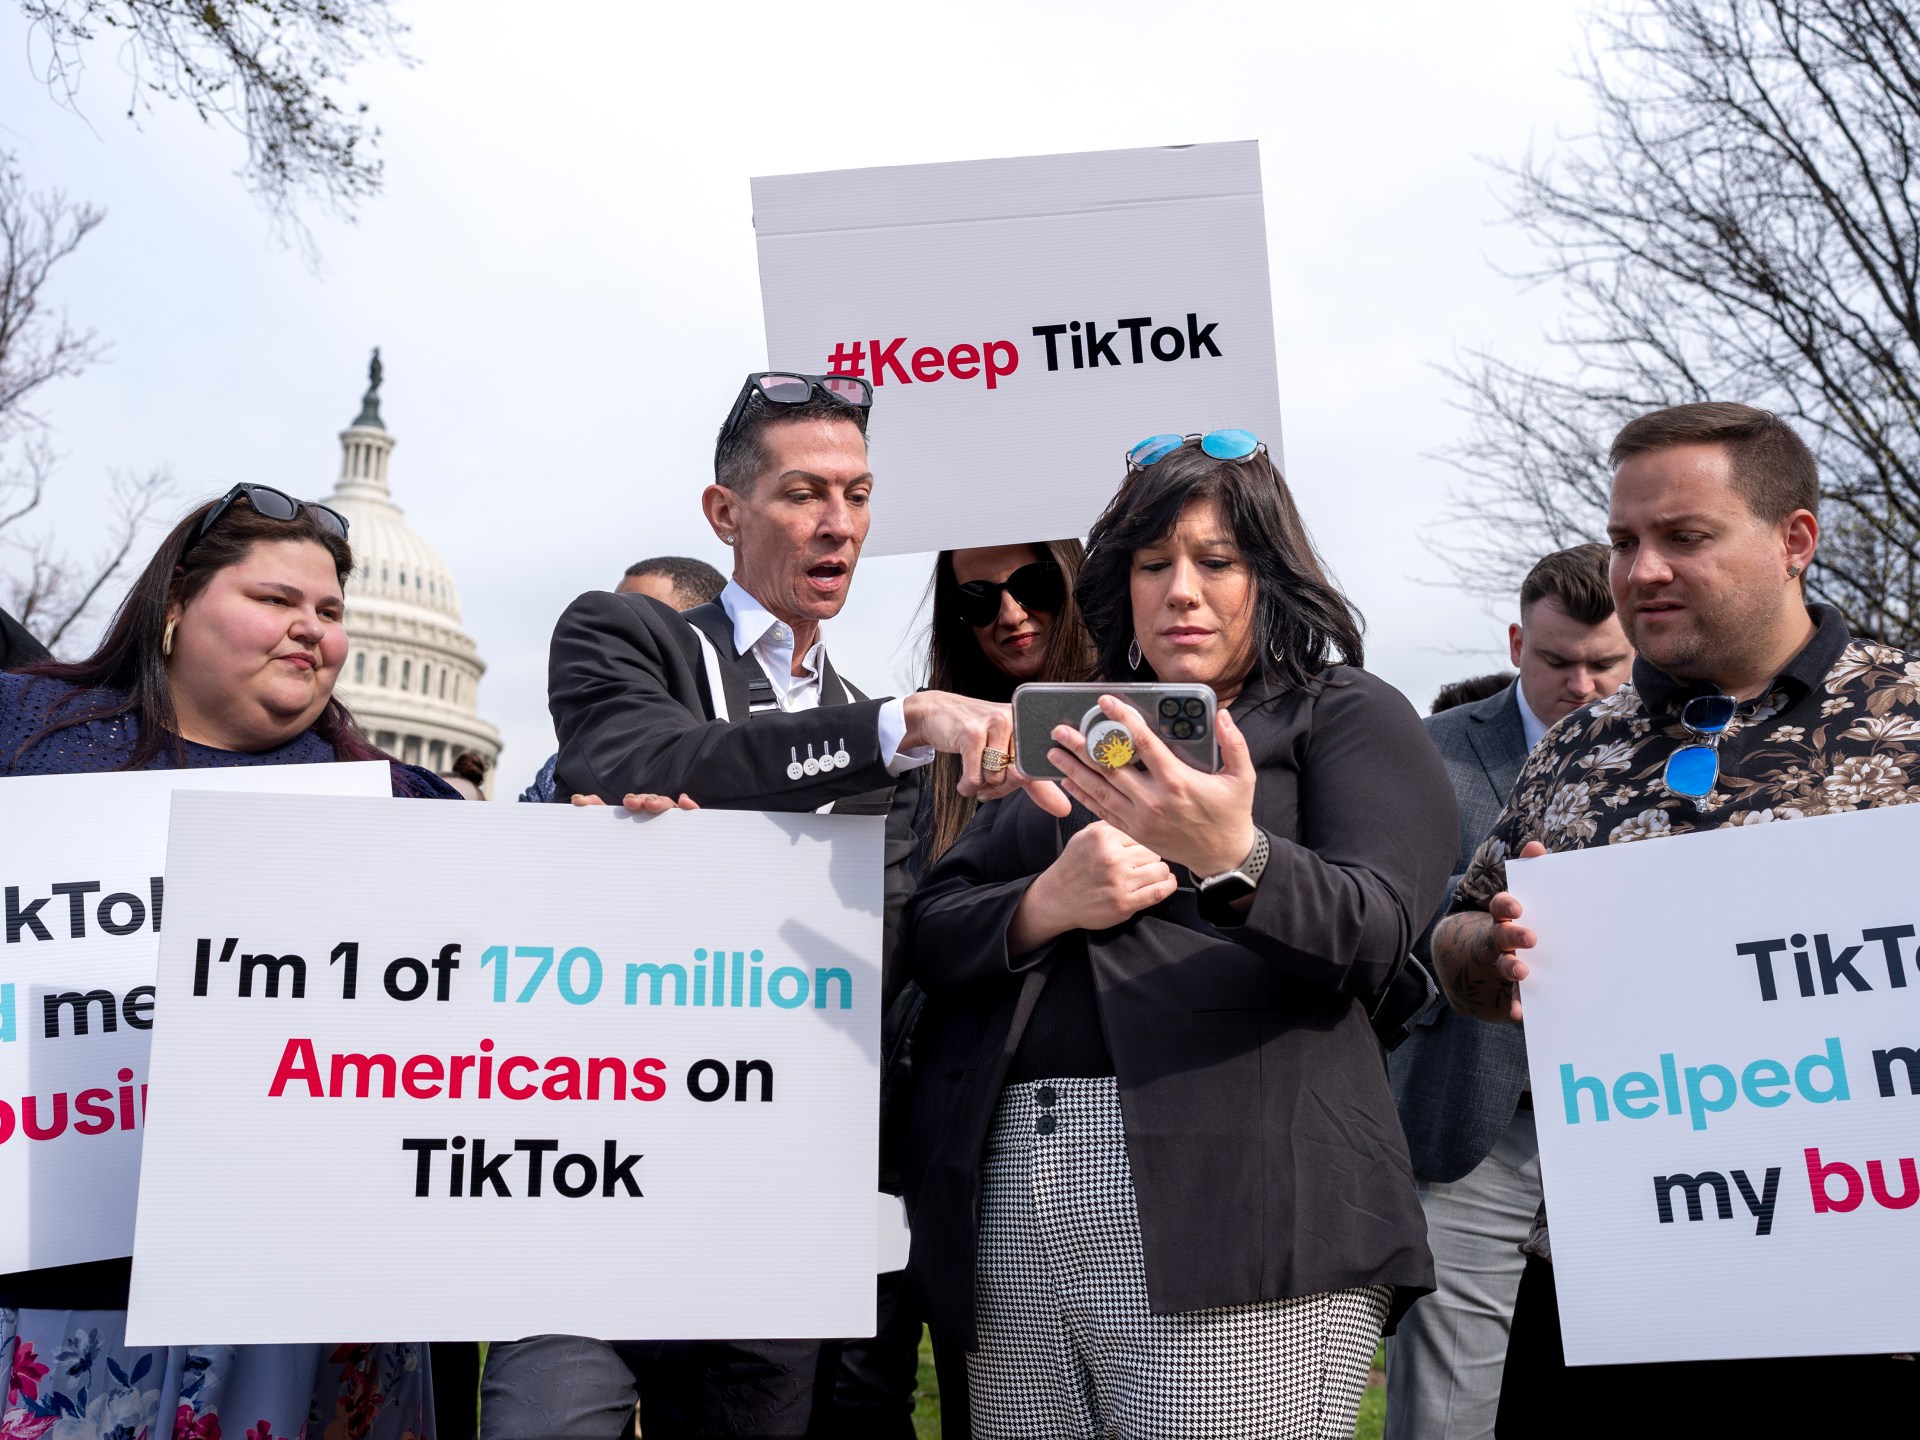 US House passes bill that would ban TikTok amid national security concerns | Technology News [Video]